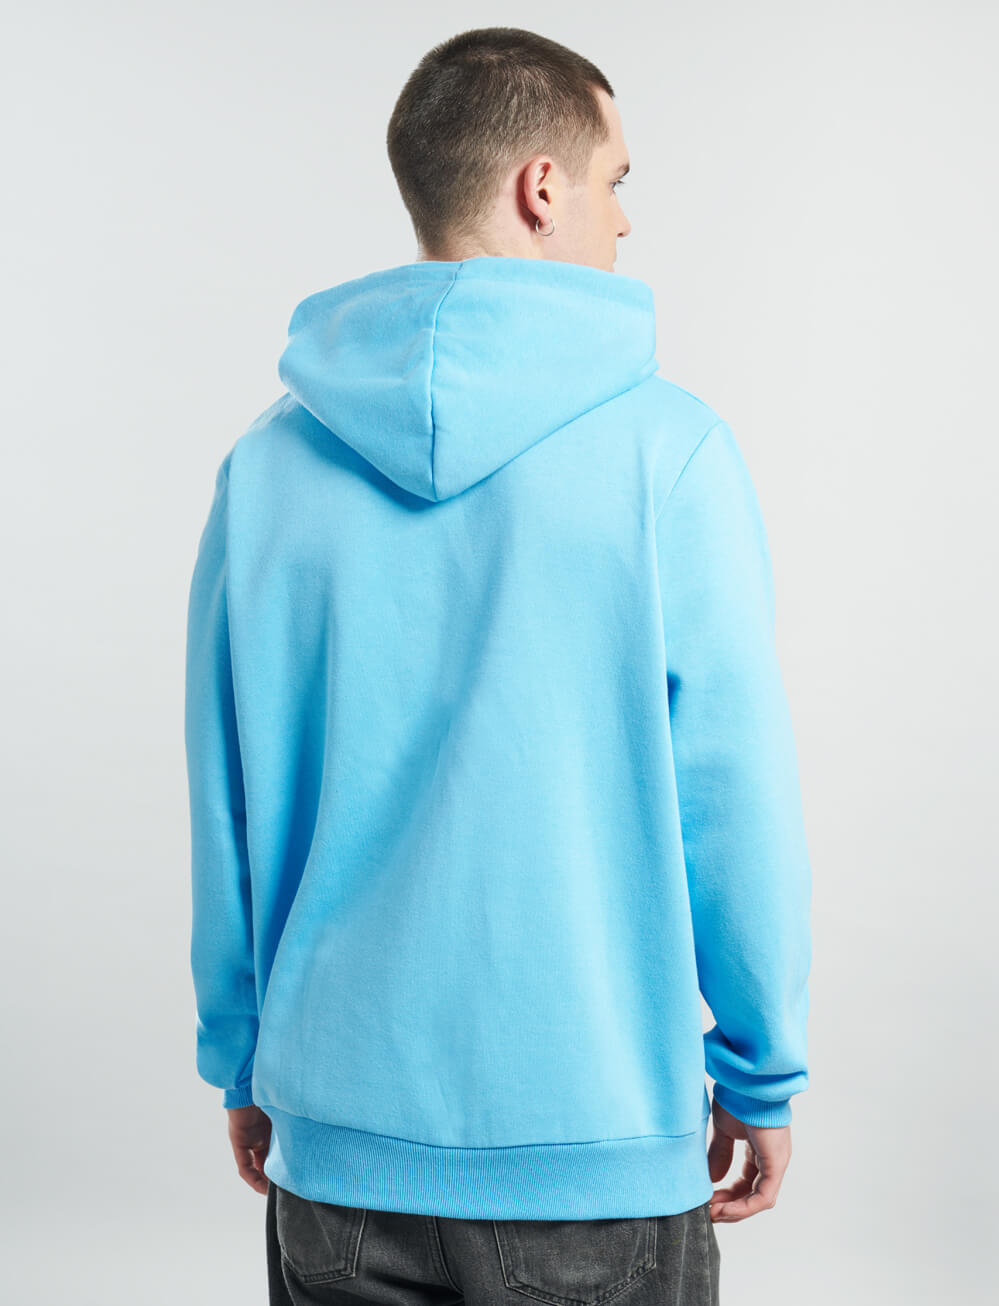 Official West Ham United Logo Hoodie - Blue - The World Football Store